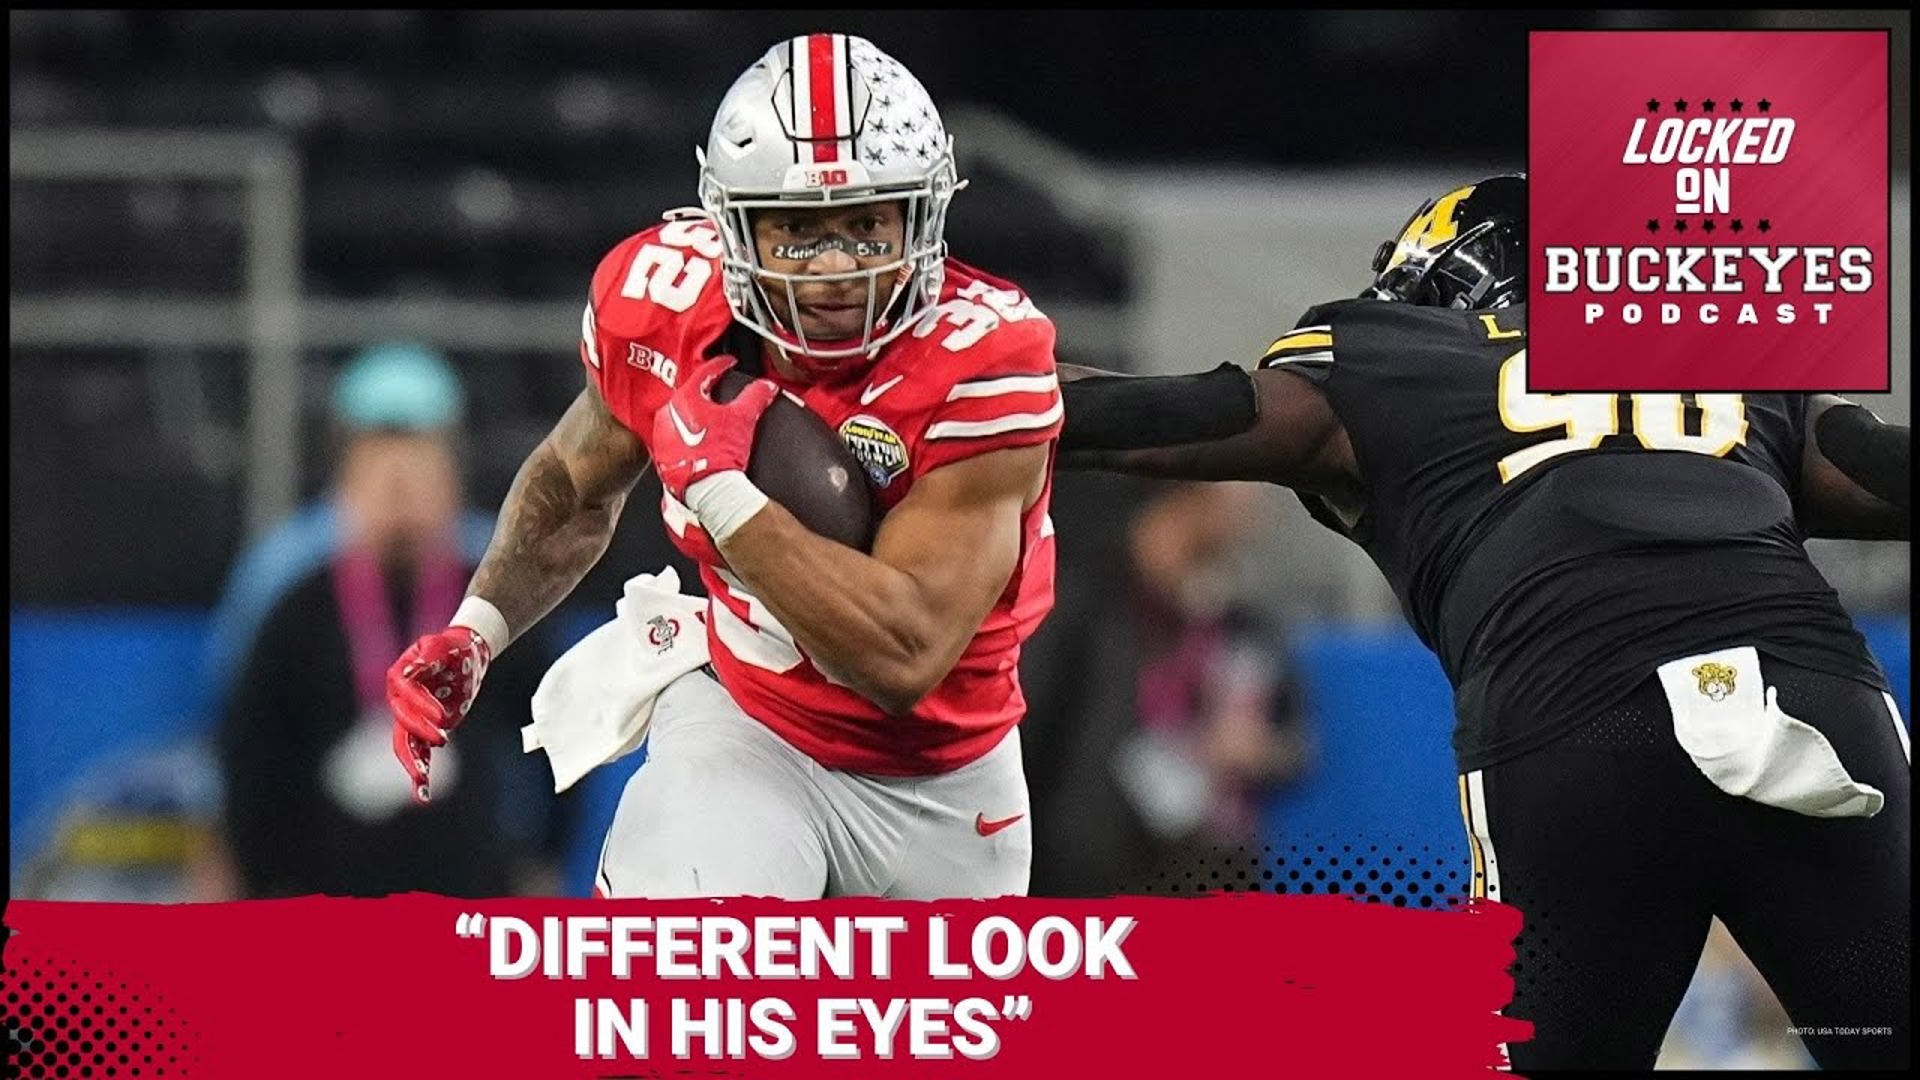 TreVeyon Has the Right Mindset Heading into Final Year at Ohio State | Ohio State Buckeyes Podcast